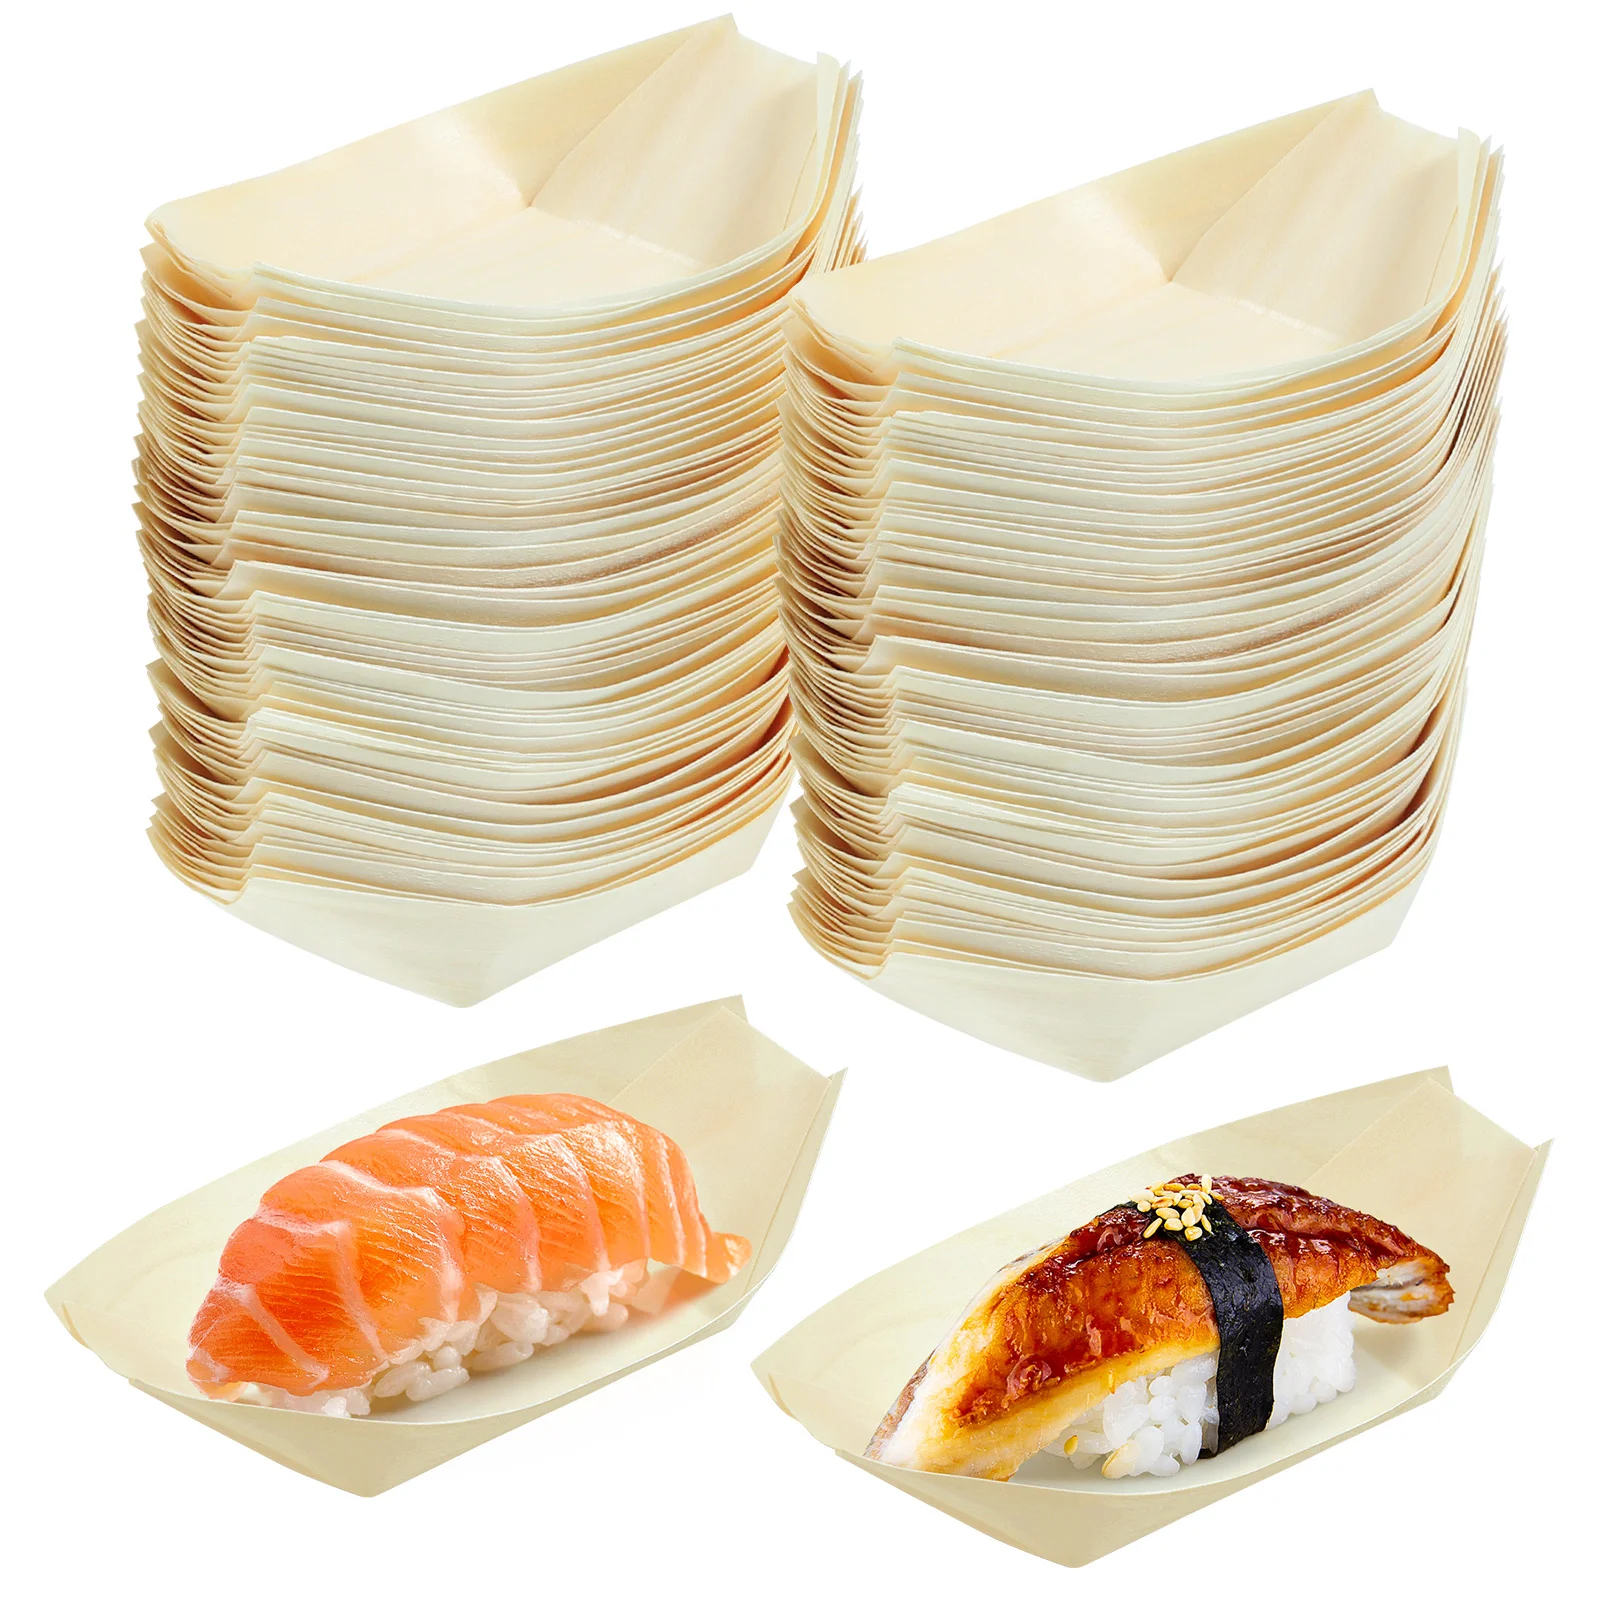 

Sushi Boat Serving Food Wooden Tray Plates Disposable Boats Plate Wood Trays Snack Bowl Paper Dish For Bowls Bamboo Dishes